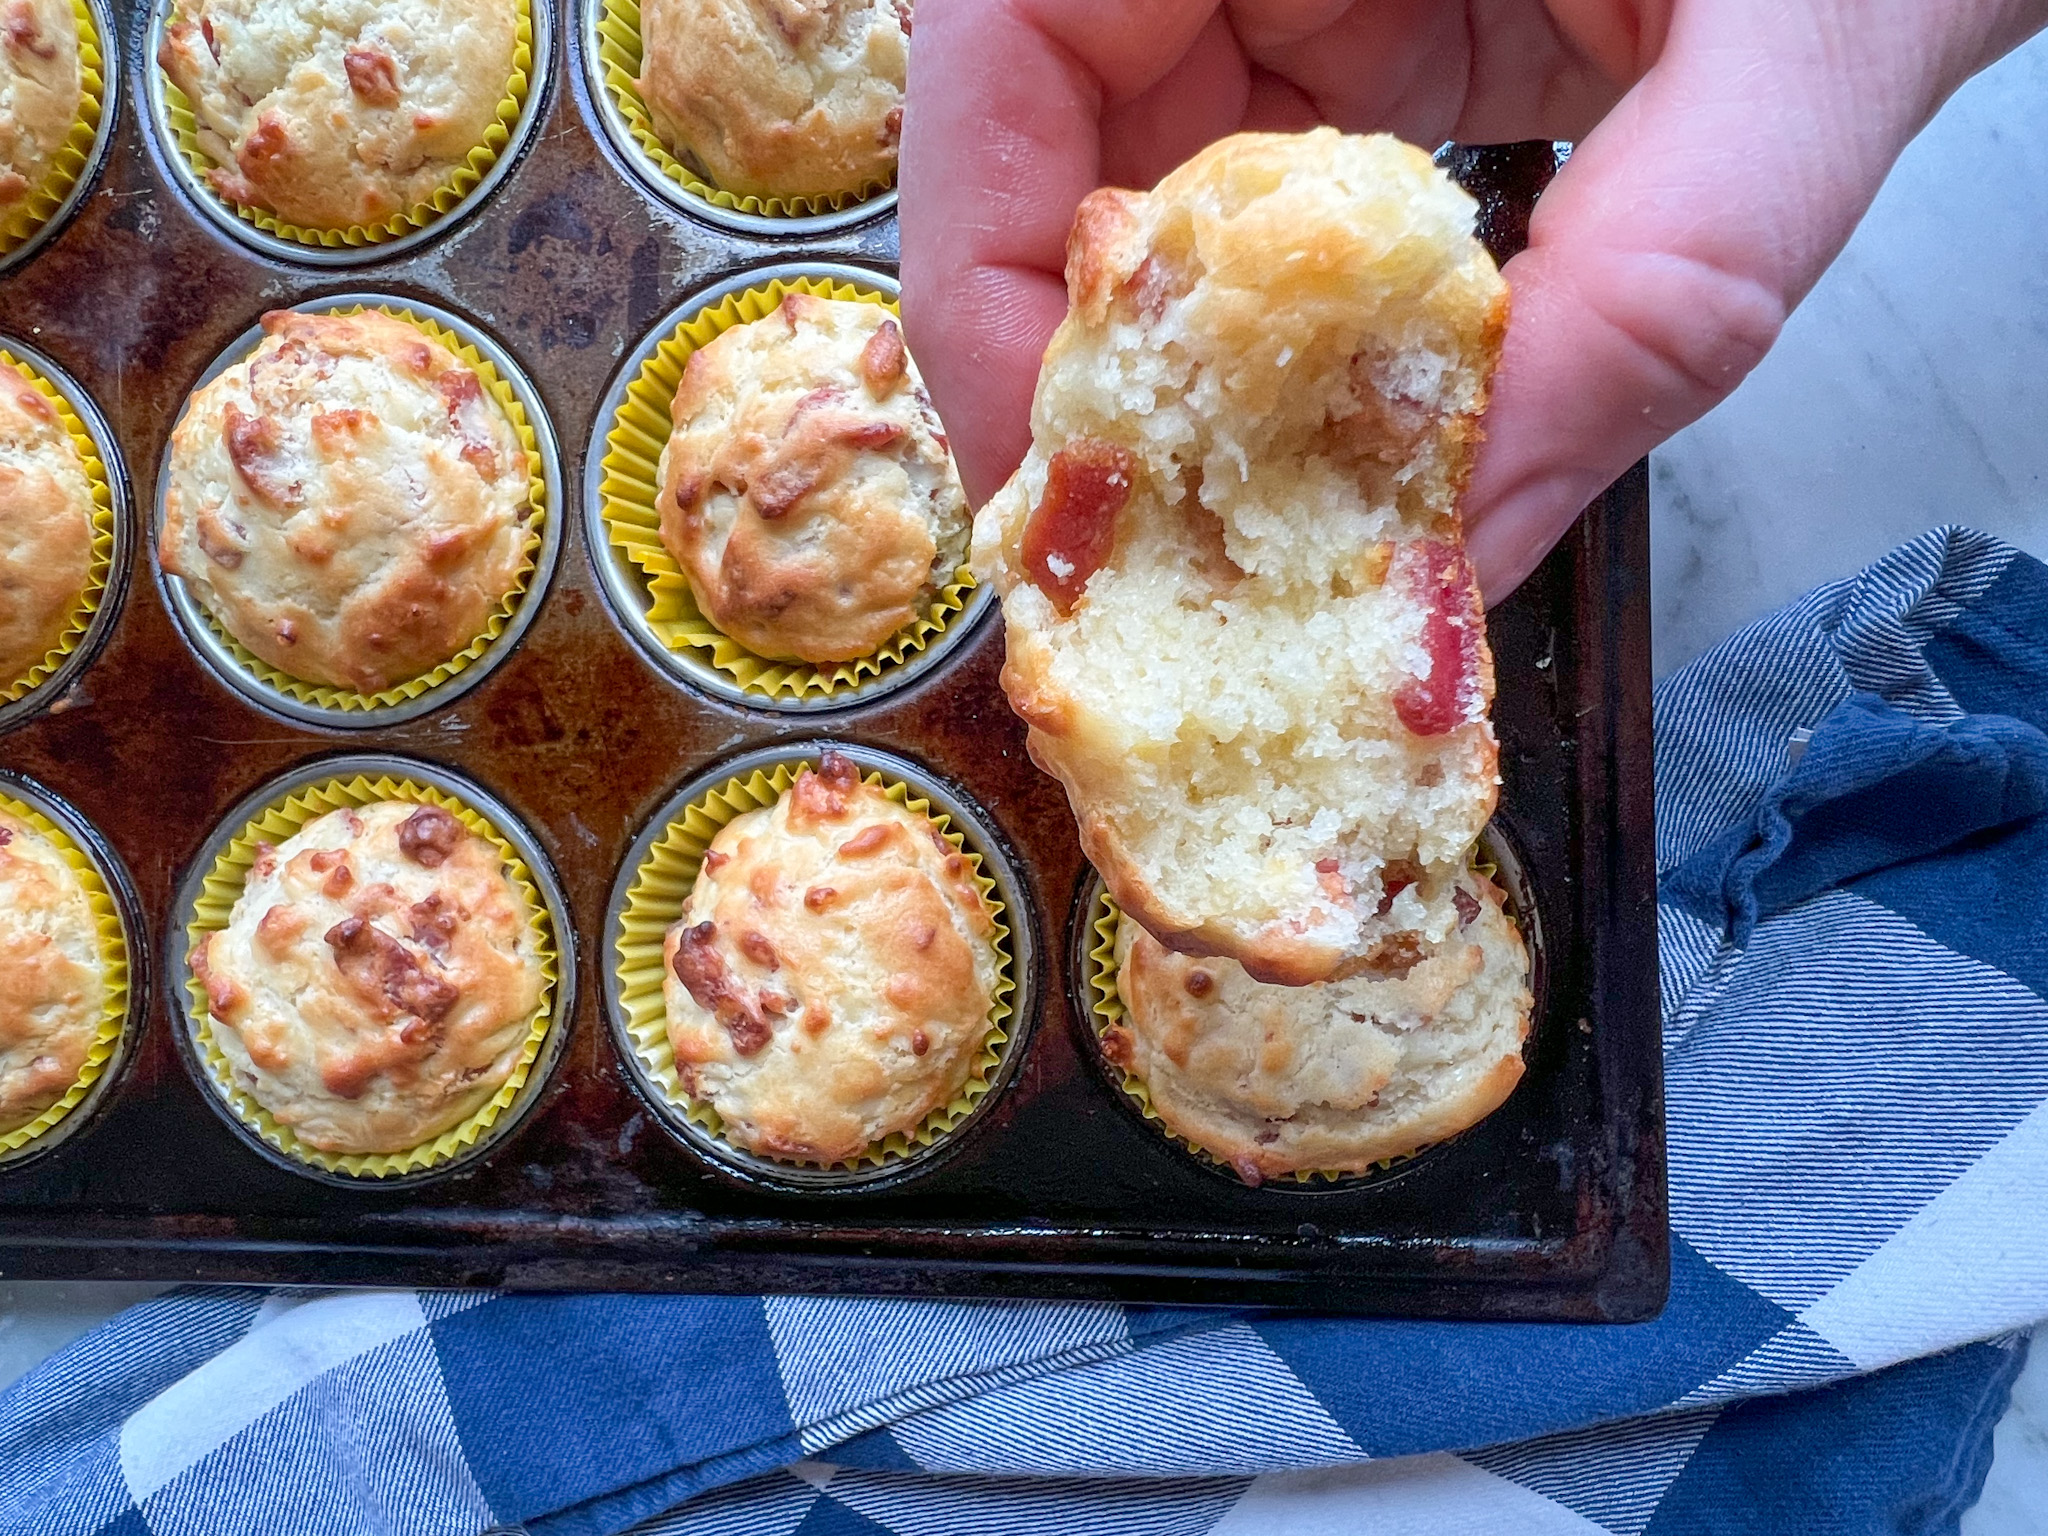 bacon cheese muffins with a blue and white napkin and a hand holding one with a bite out of it